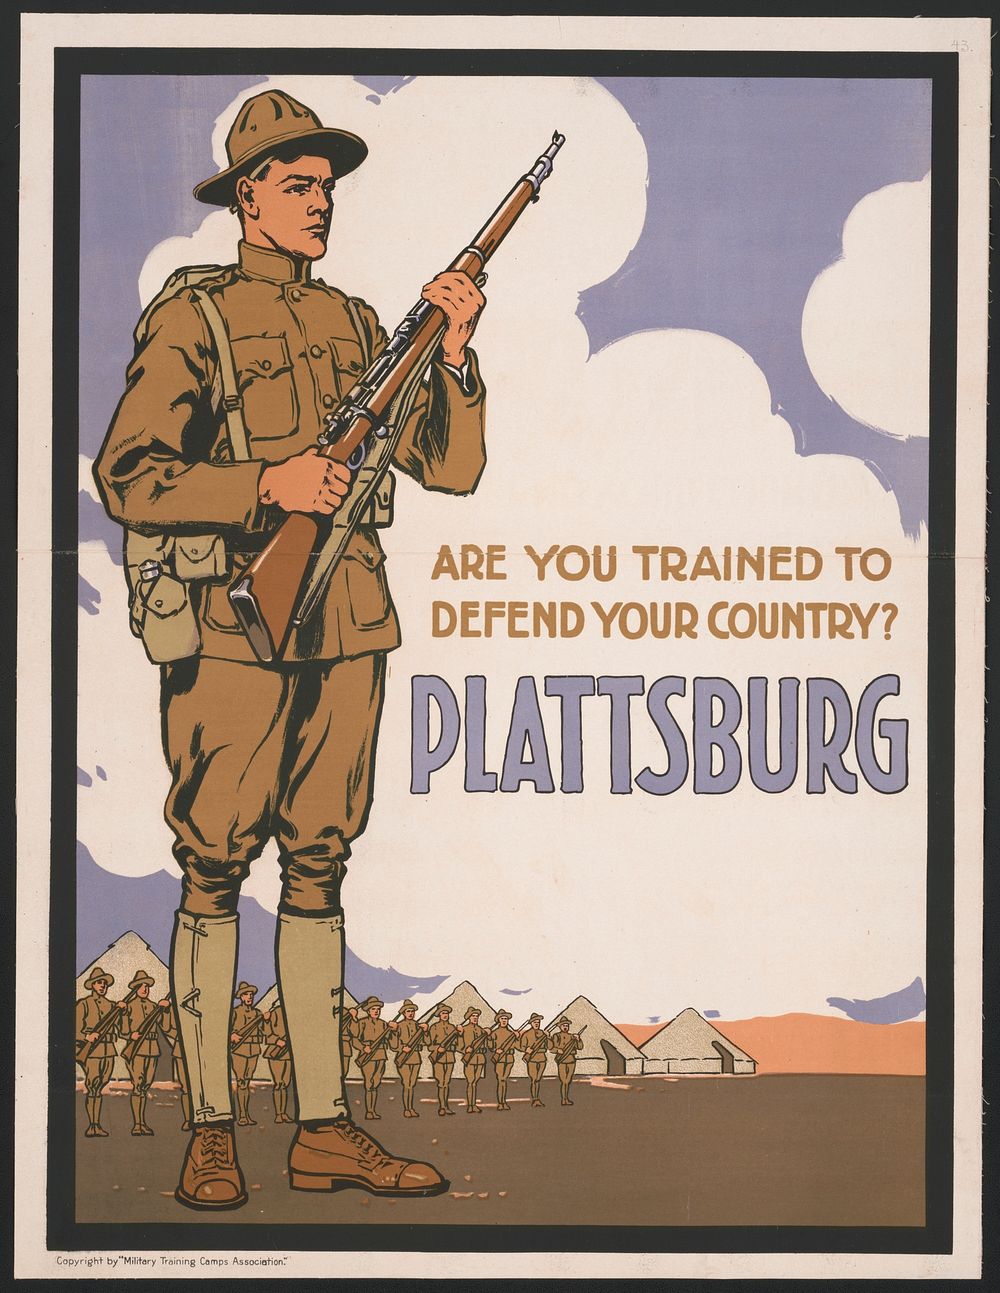 Poster showing a soldier with troops and tents in the background, presumably the Military Training Camp in Plattsburgh, N.Y.